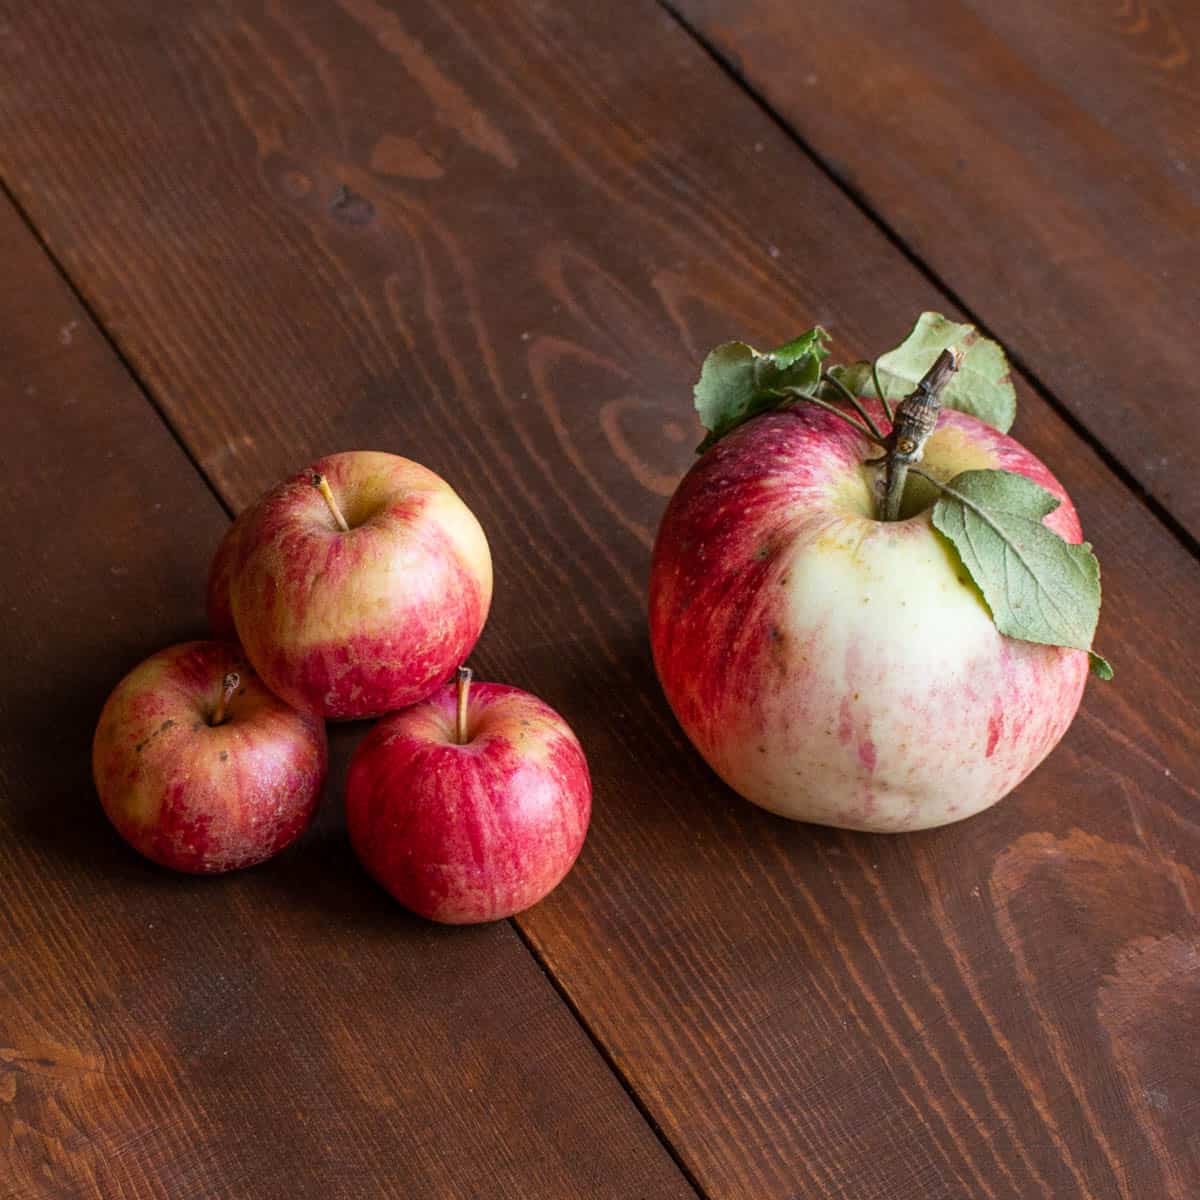 chestnut crab apples and a wild apple on a board